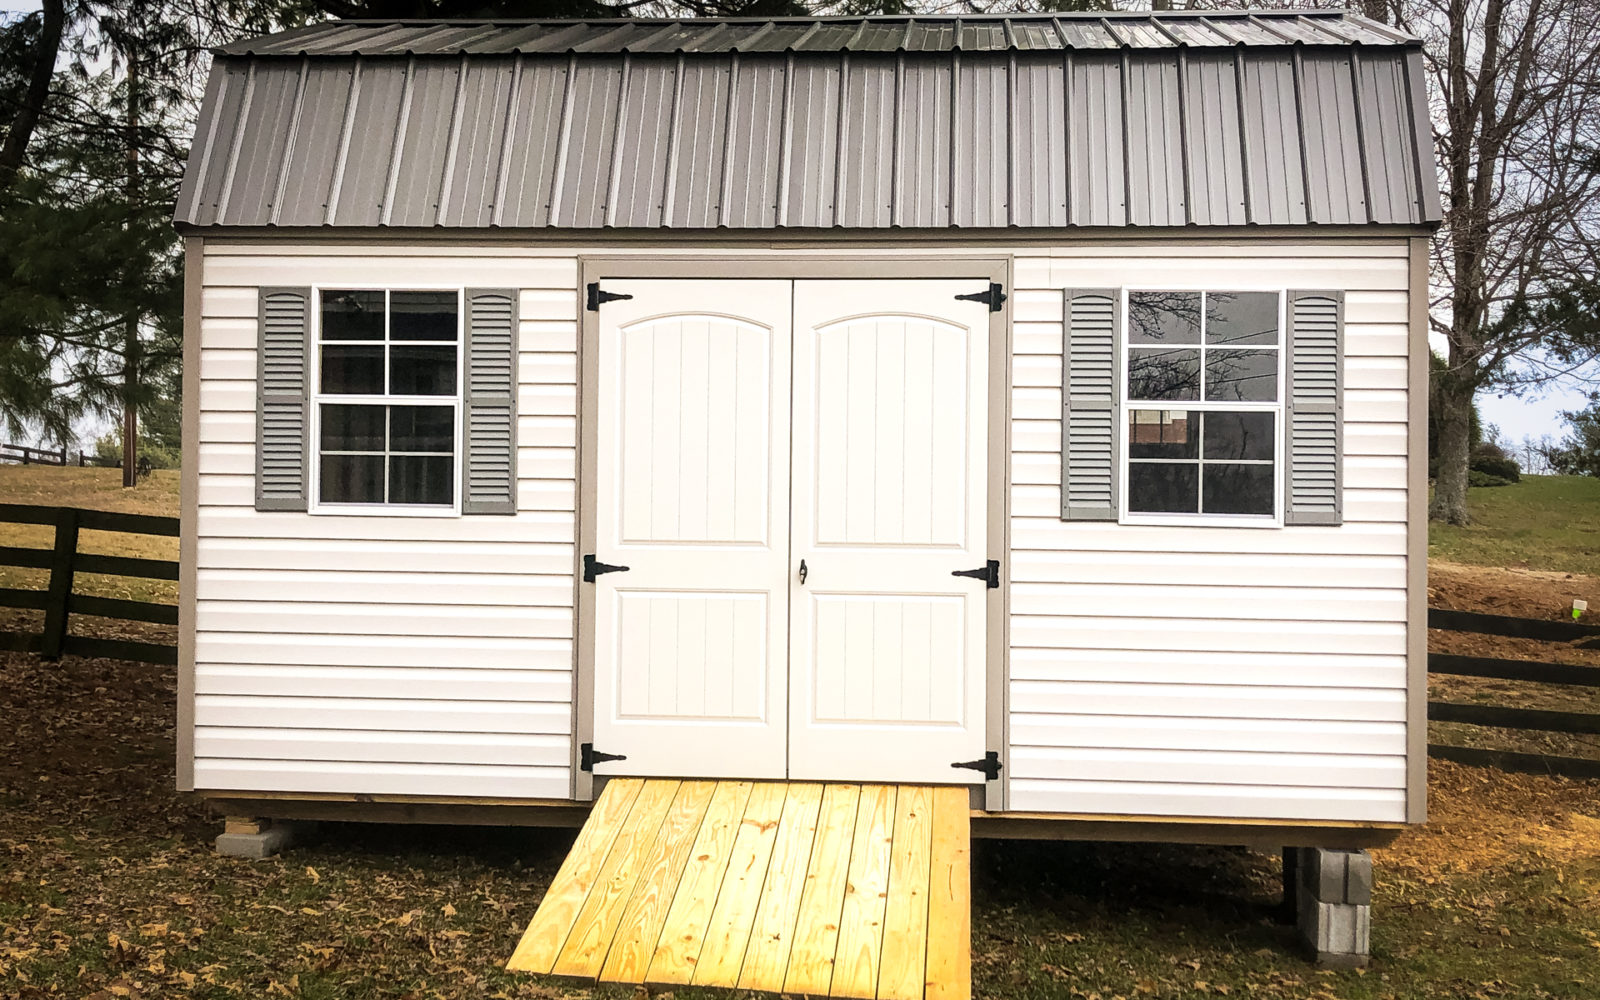 exterior of barn-style black roofed lawn mower storage shed